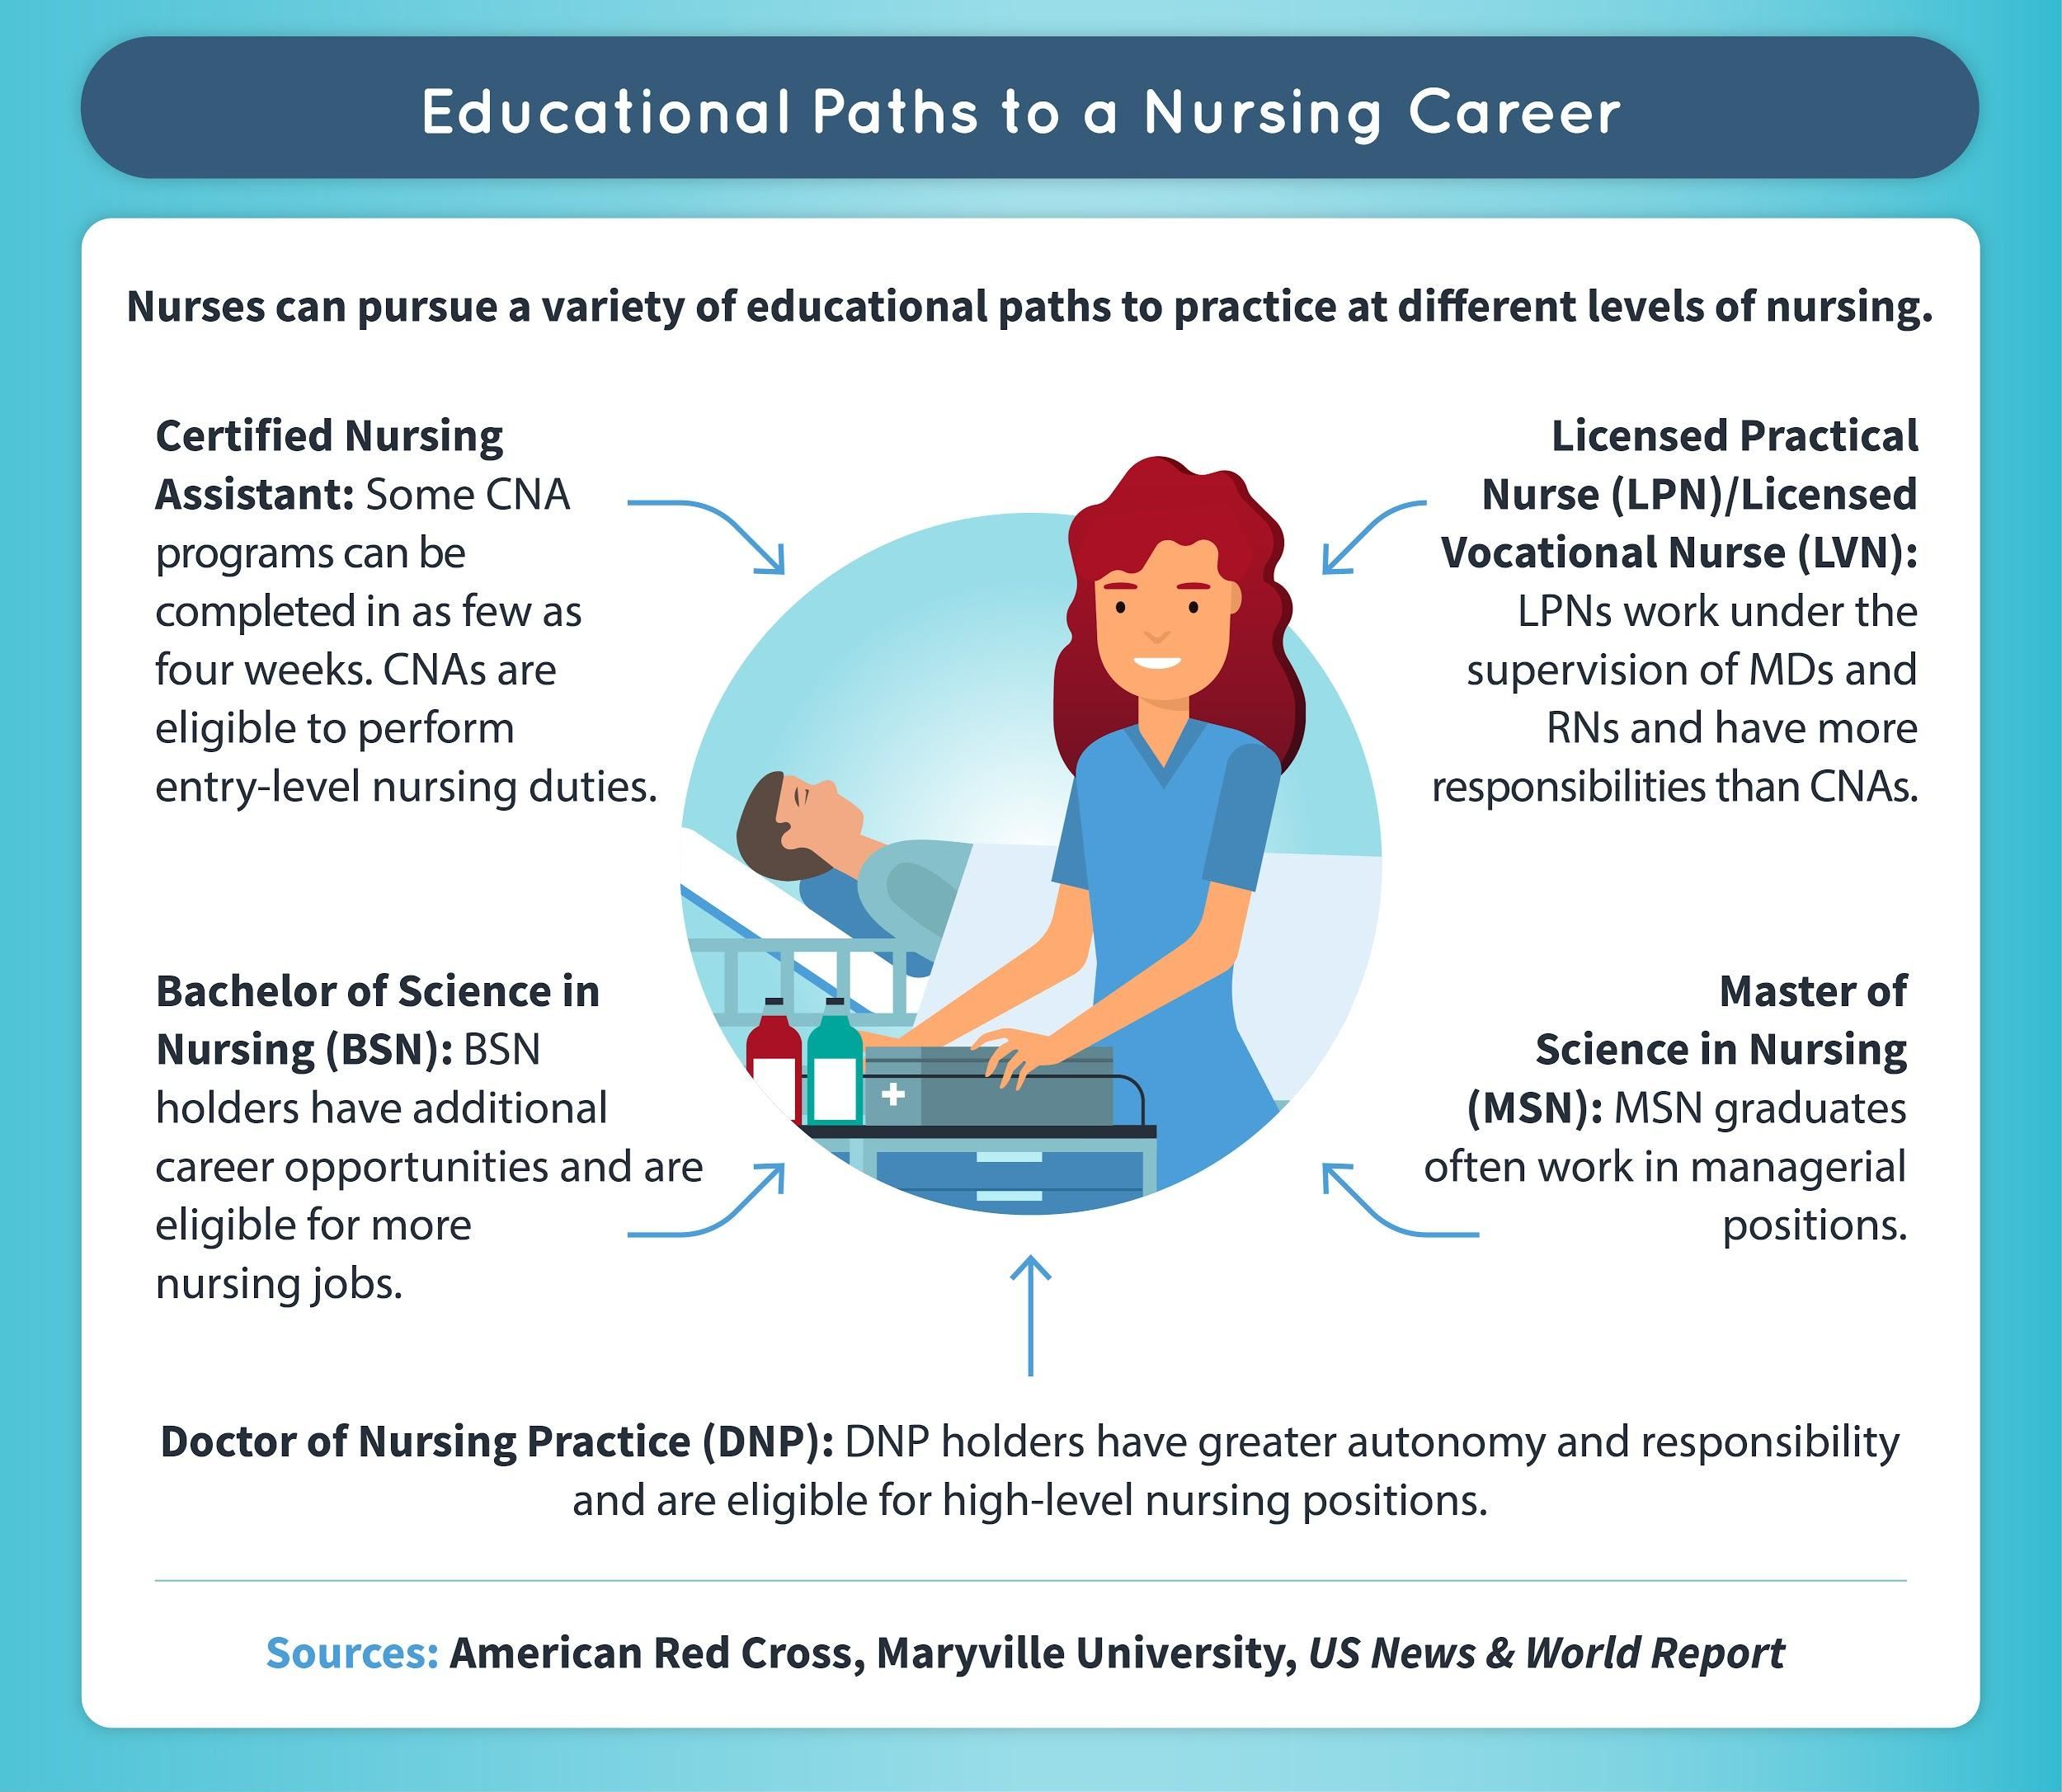 Nurses can pursue a variety of educational paths to practice at different levels of nursing.